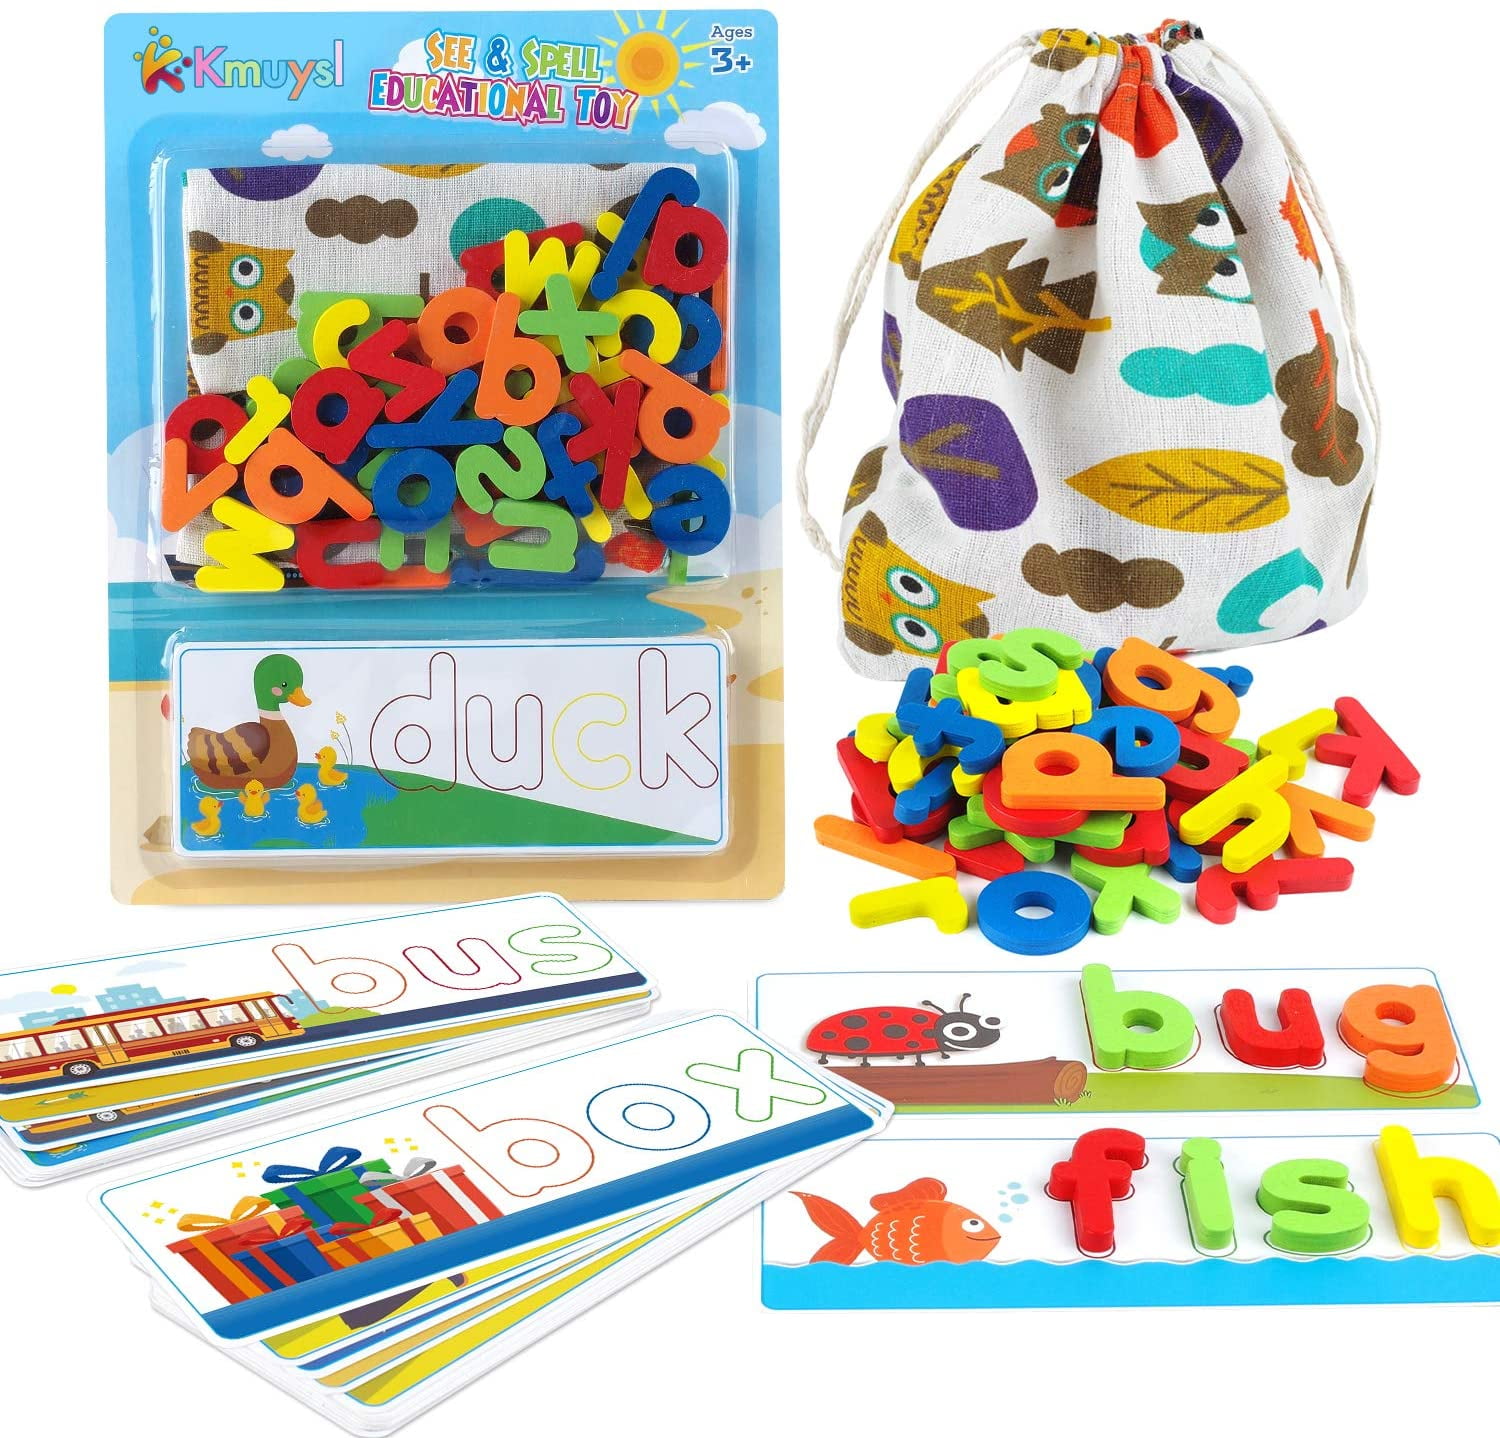 Details about   Matching Letter Learning Game Spelling Toy Educational Toy Toddler for Baby Kids 